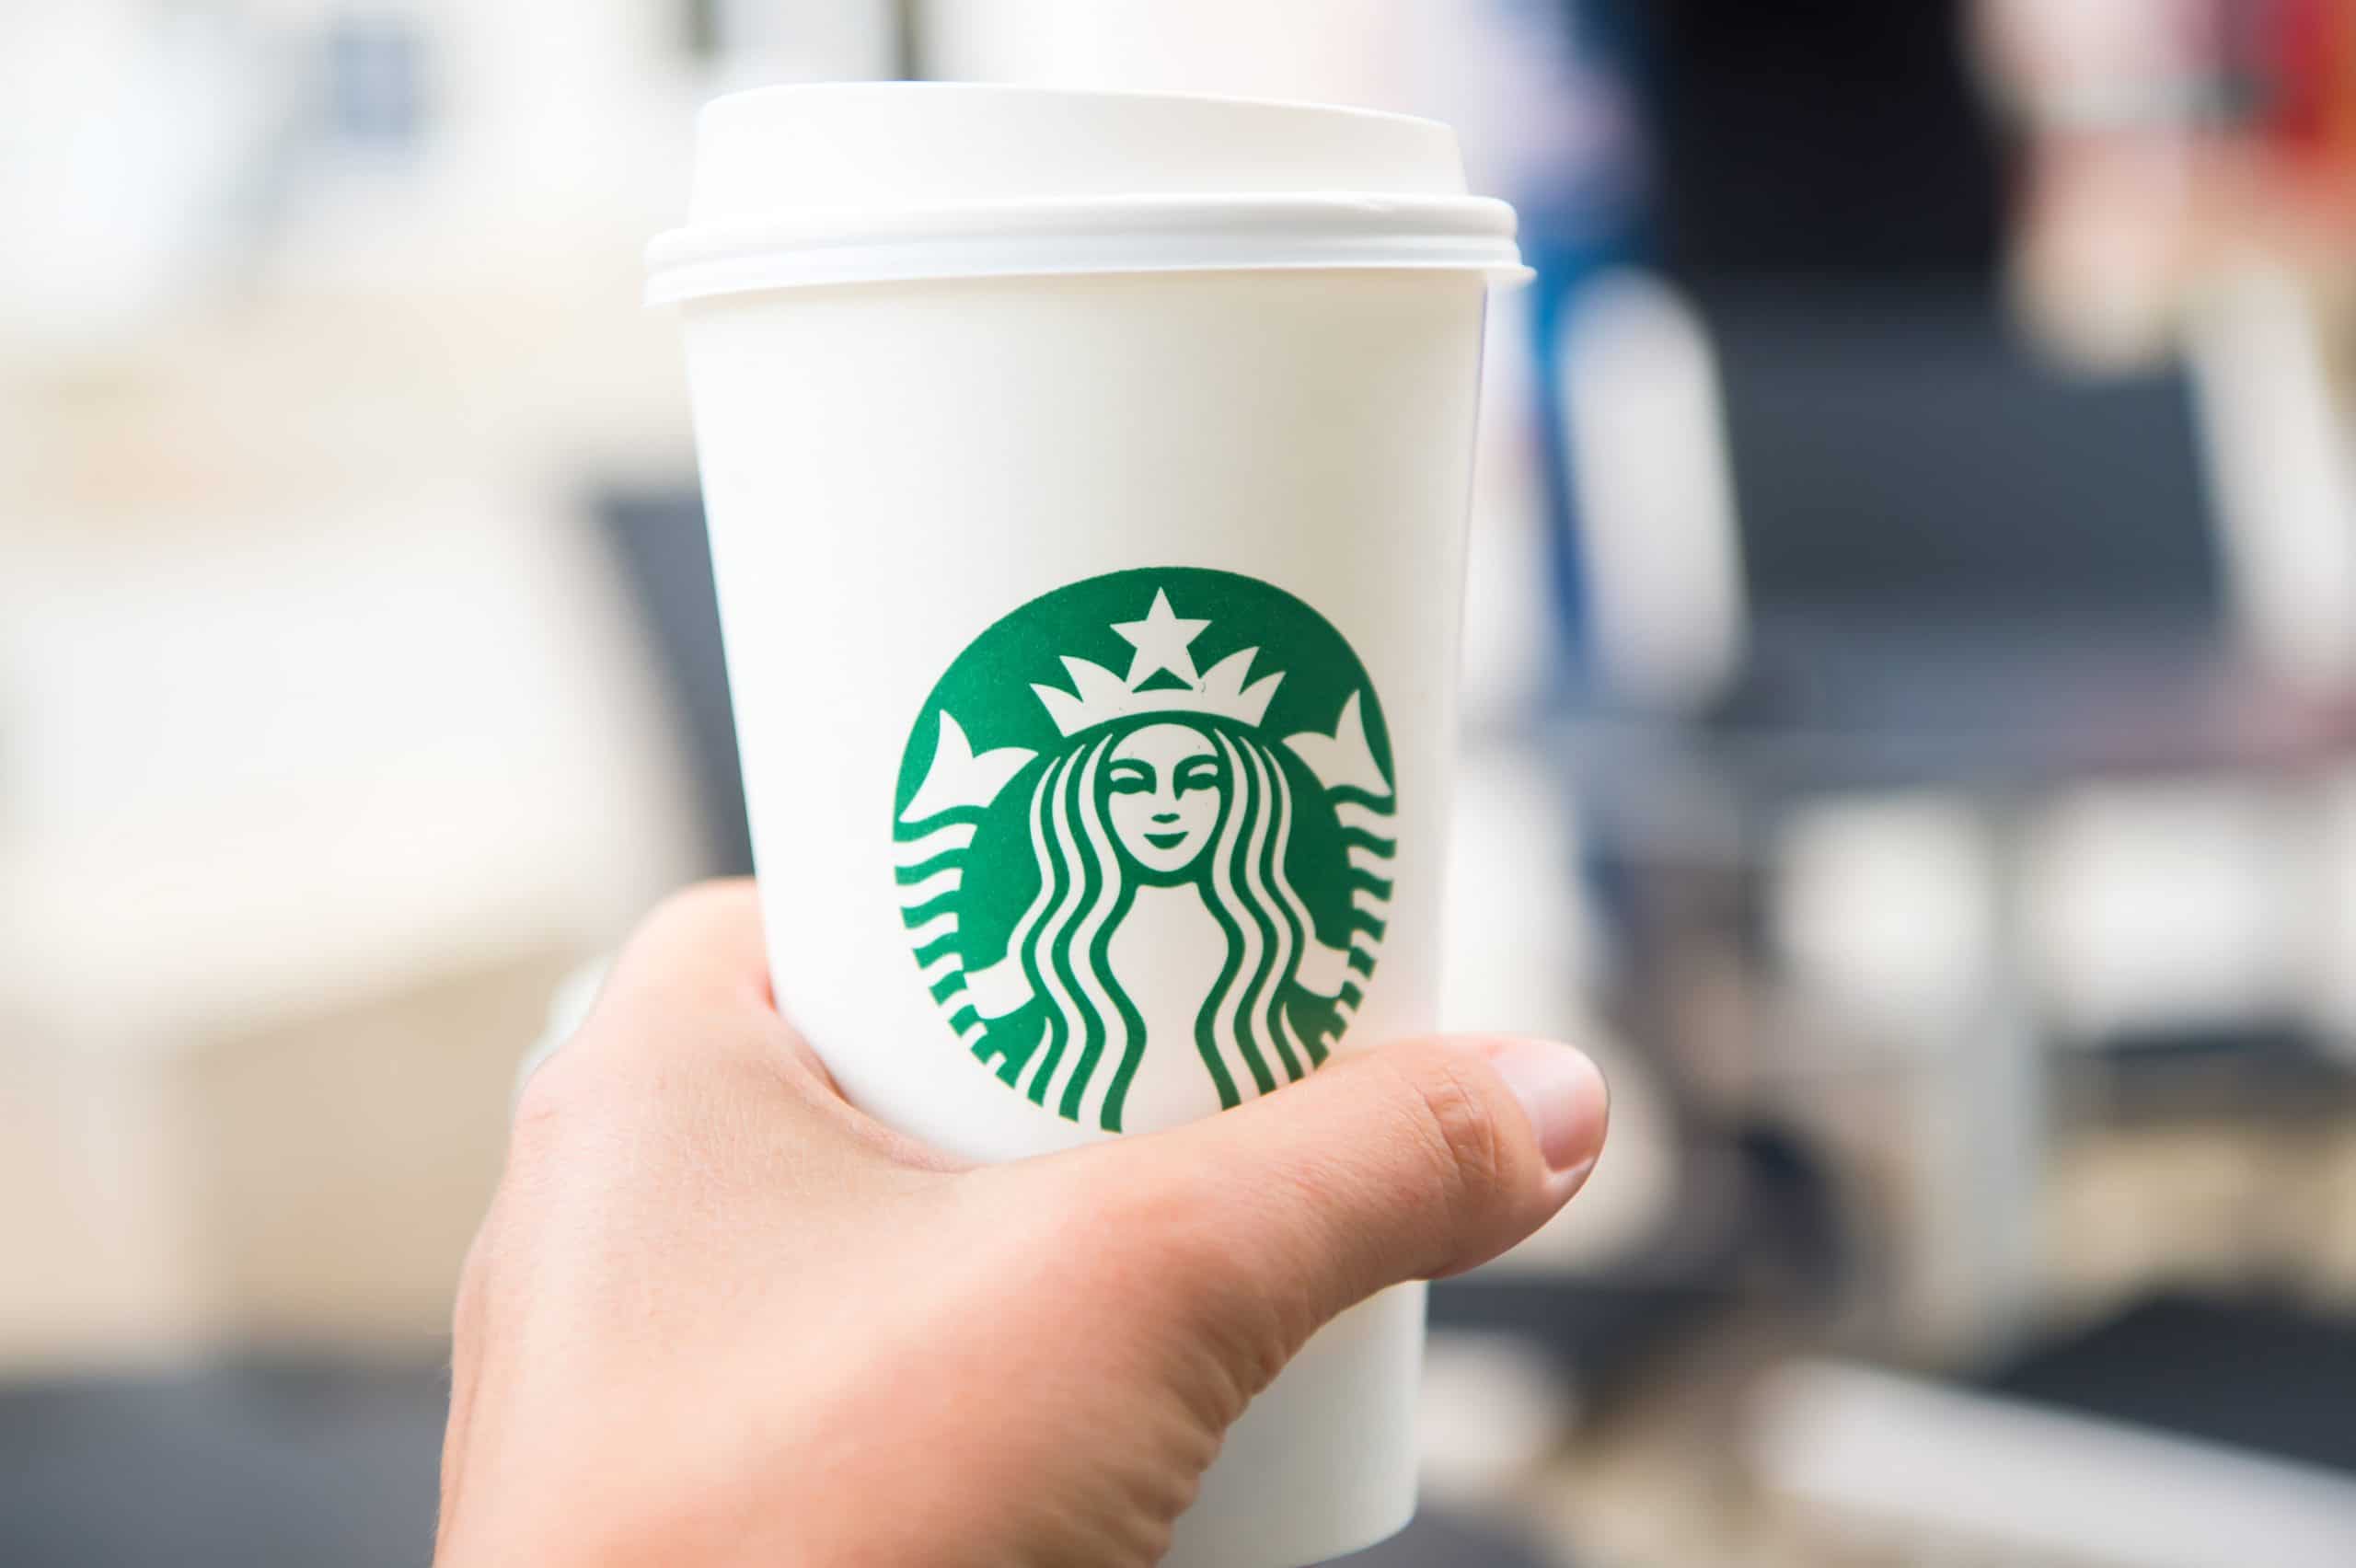 Get Starbucks gift cards for free to help fuel your next shopping spree